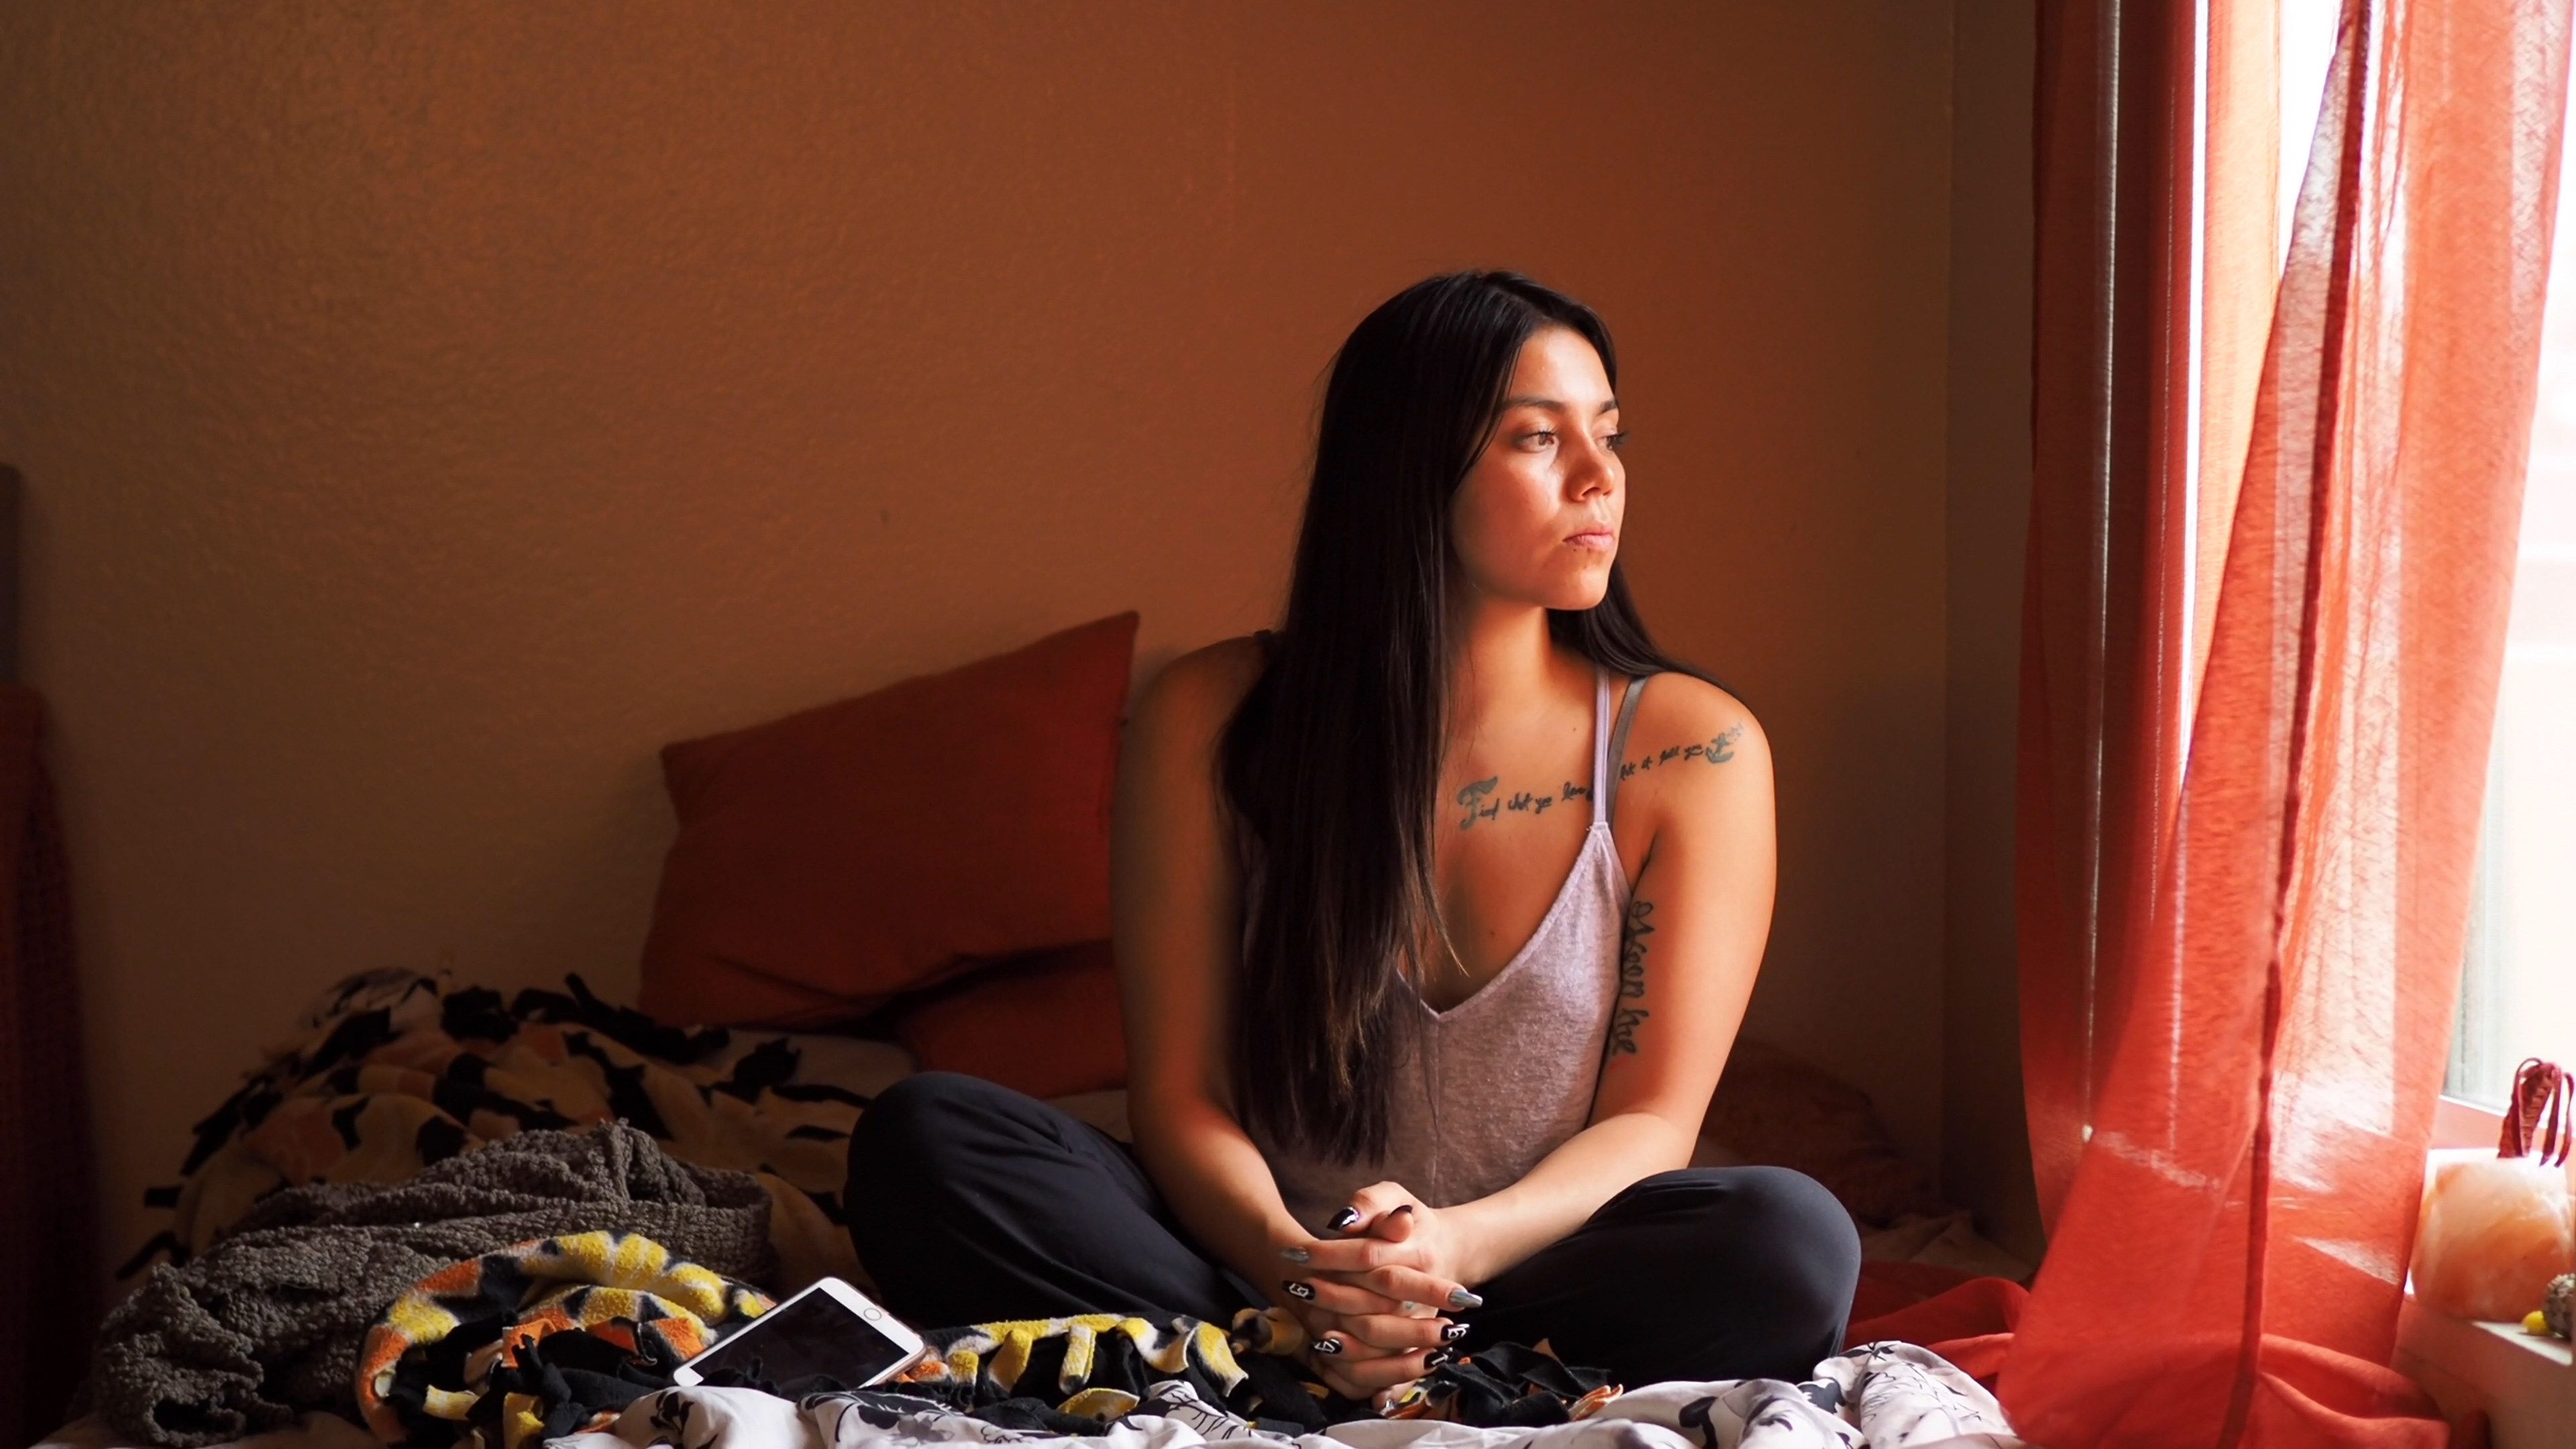 California: Young woman with long dark hair in tank top sits on bed, looks out window with orange curtains